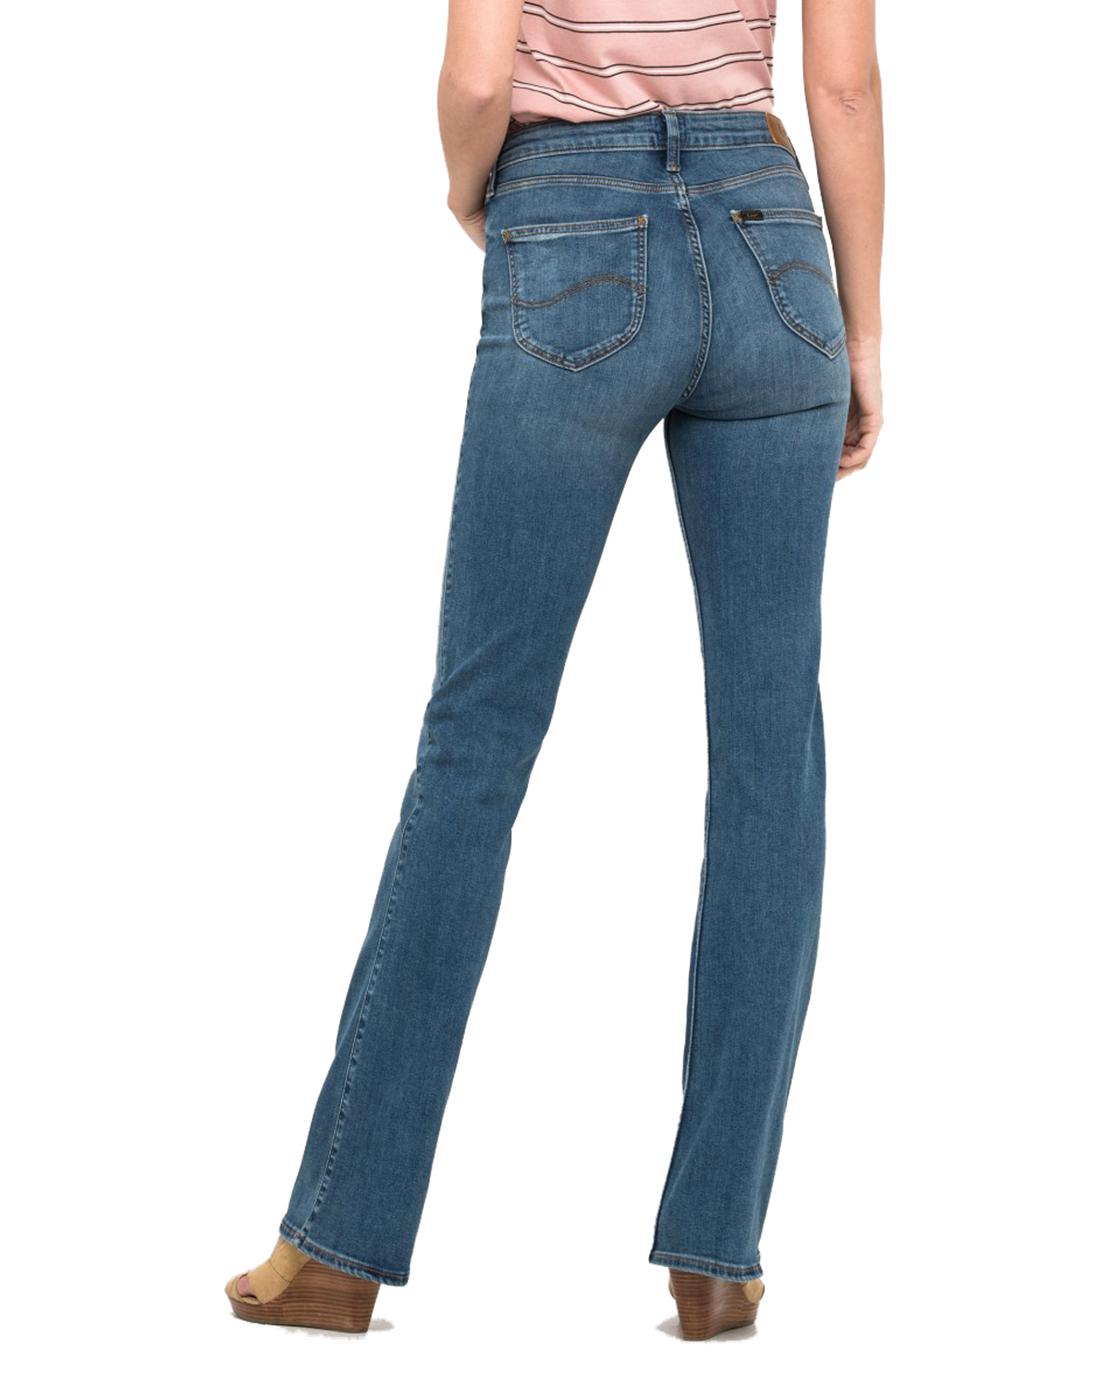 LEE JEANS Womens Hoxie Retro 70s 